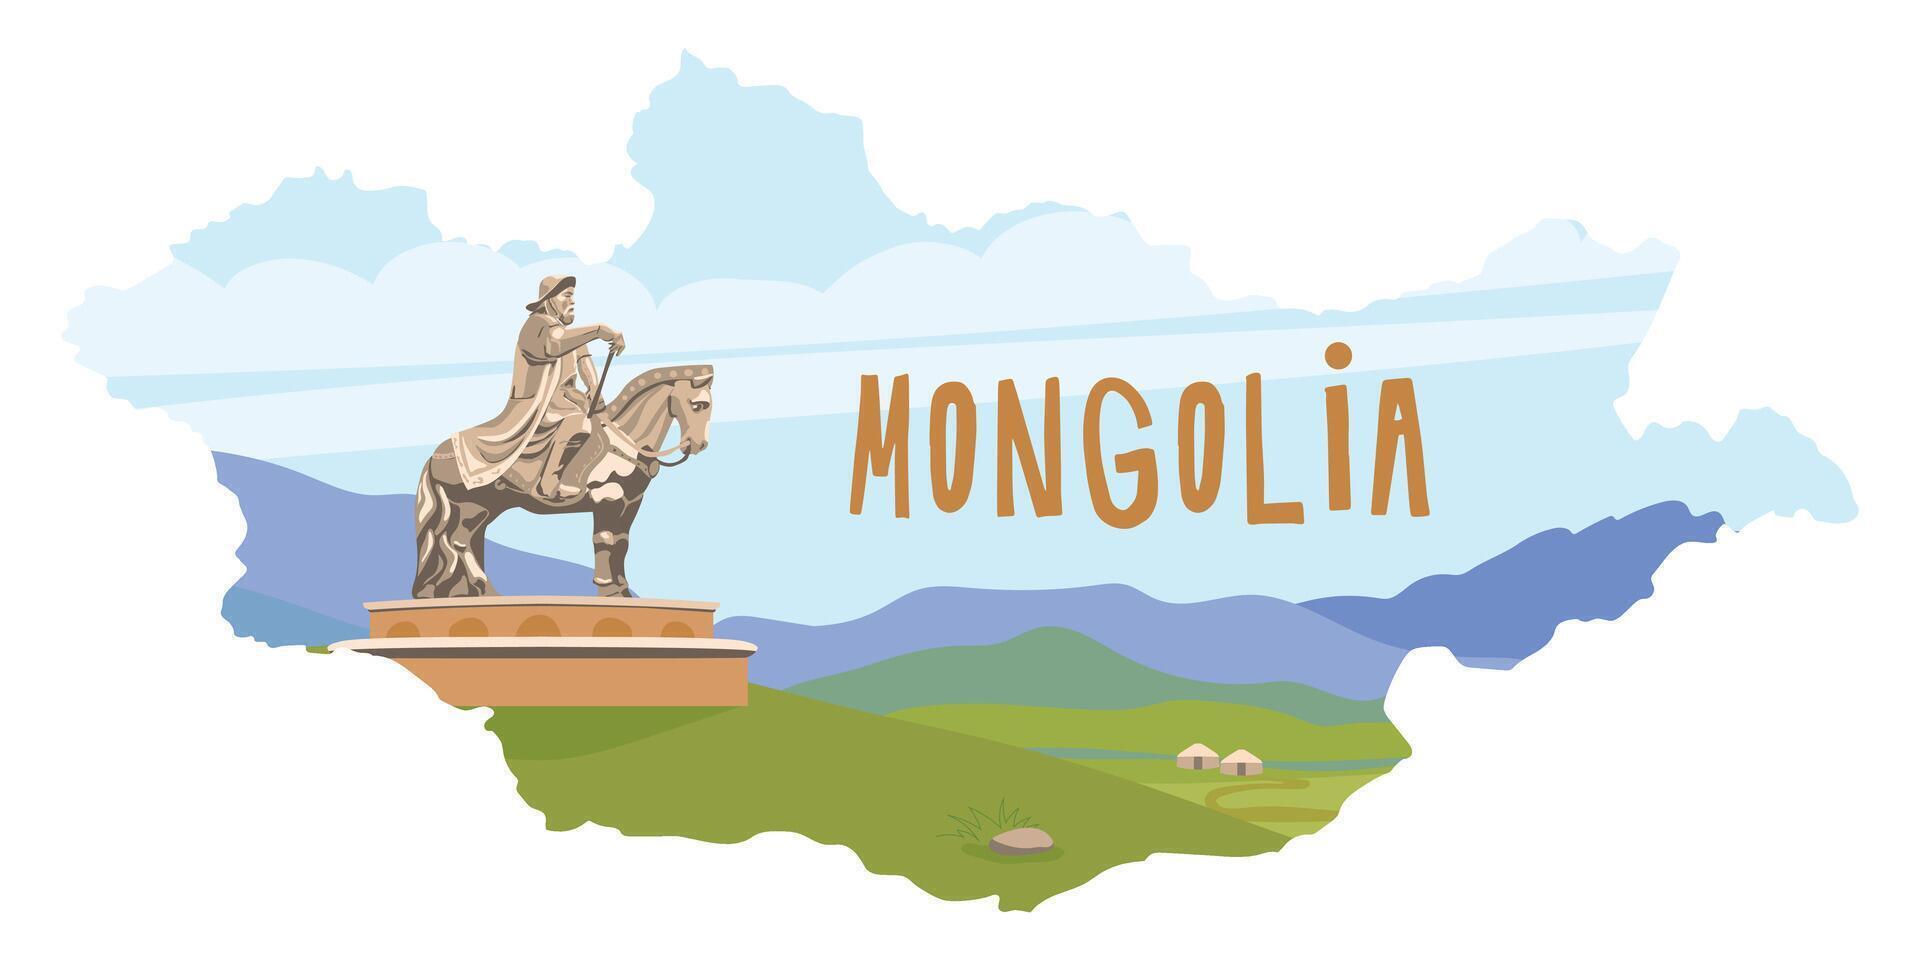 Monument to Genghis Khan in the Mongolian steppe near Ulaanbaatar. Horseman sculpture, . Founder of the Mongol Empire, leader of the nomads. Map of Mongolia. vector